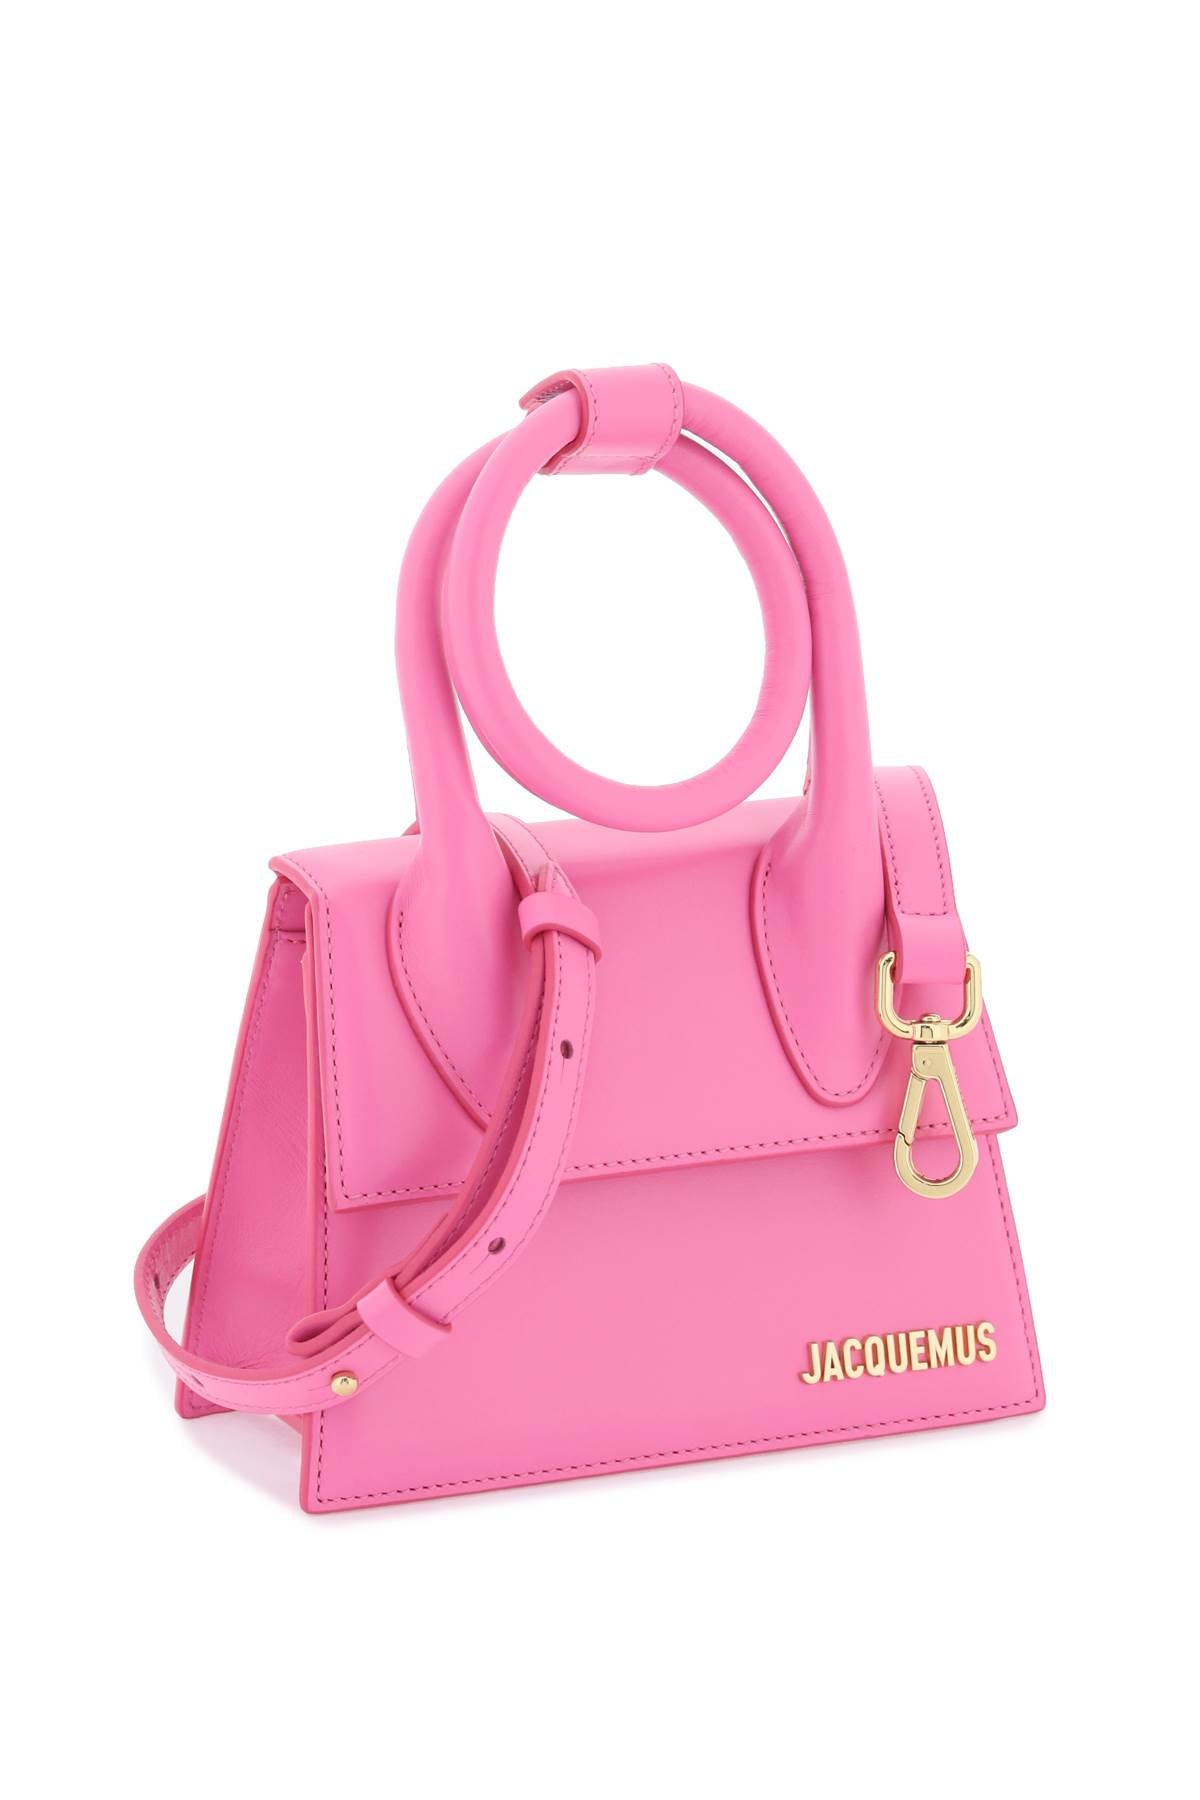 JACQUEMUS Pink Leather Mini Handbag with Knotted Handle and Gold Hardware